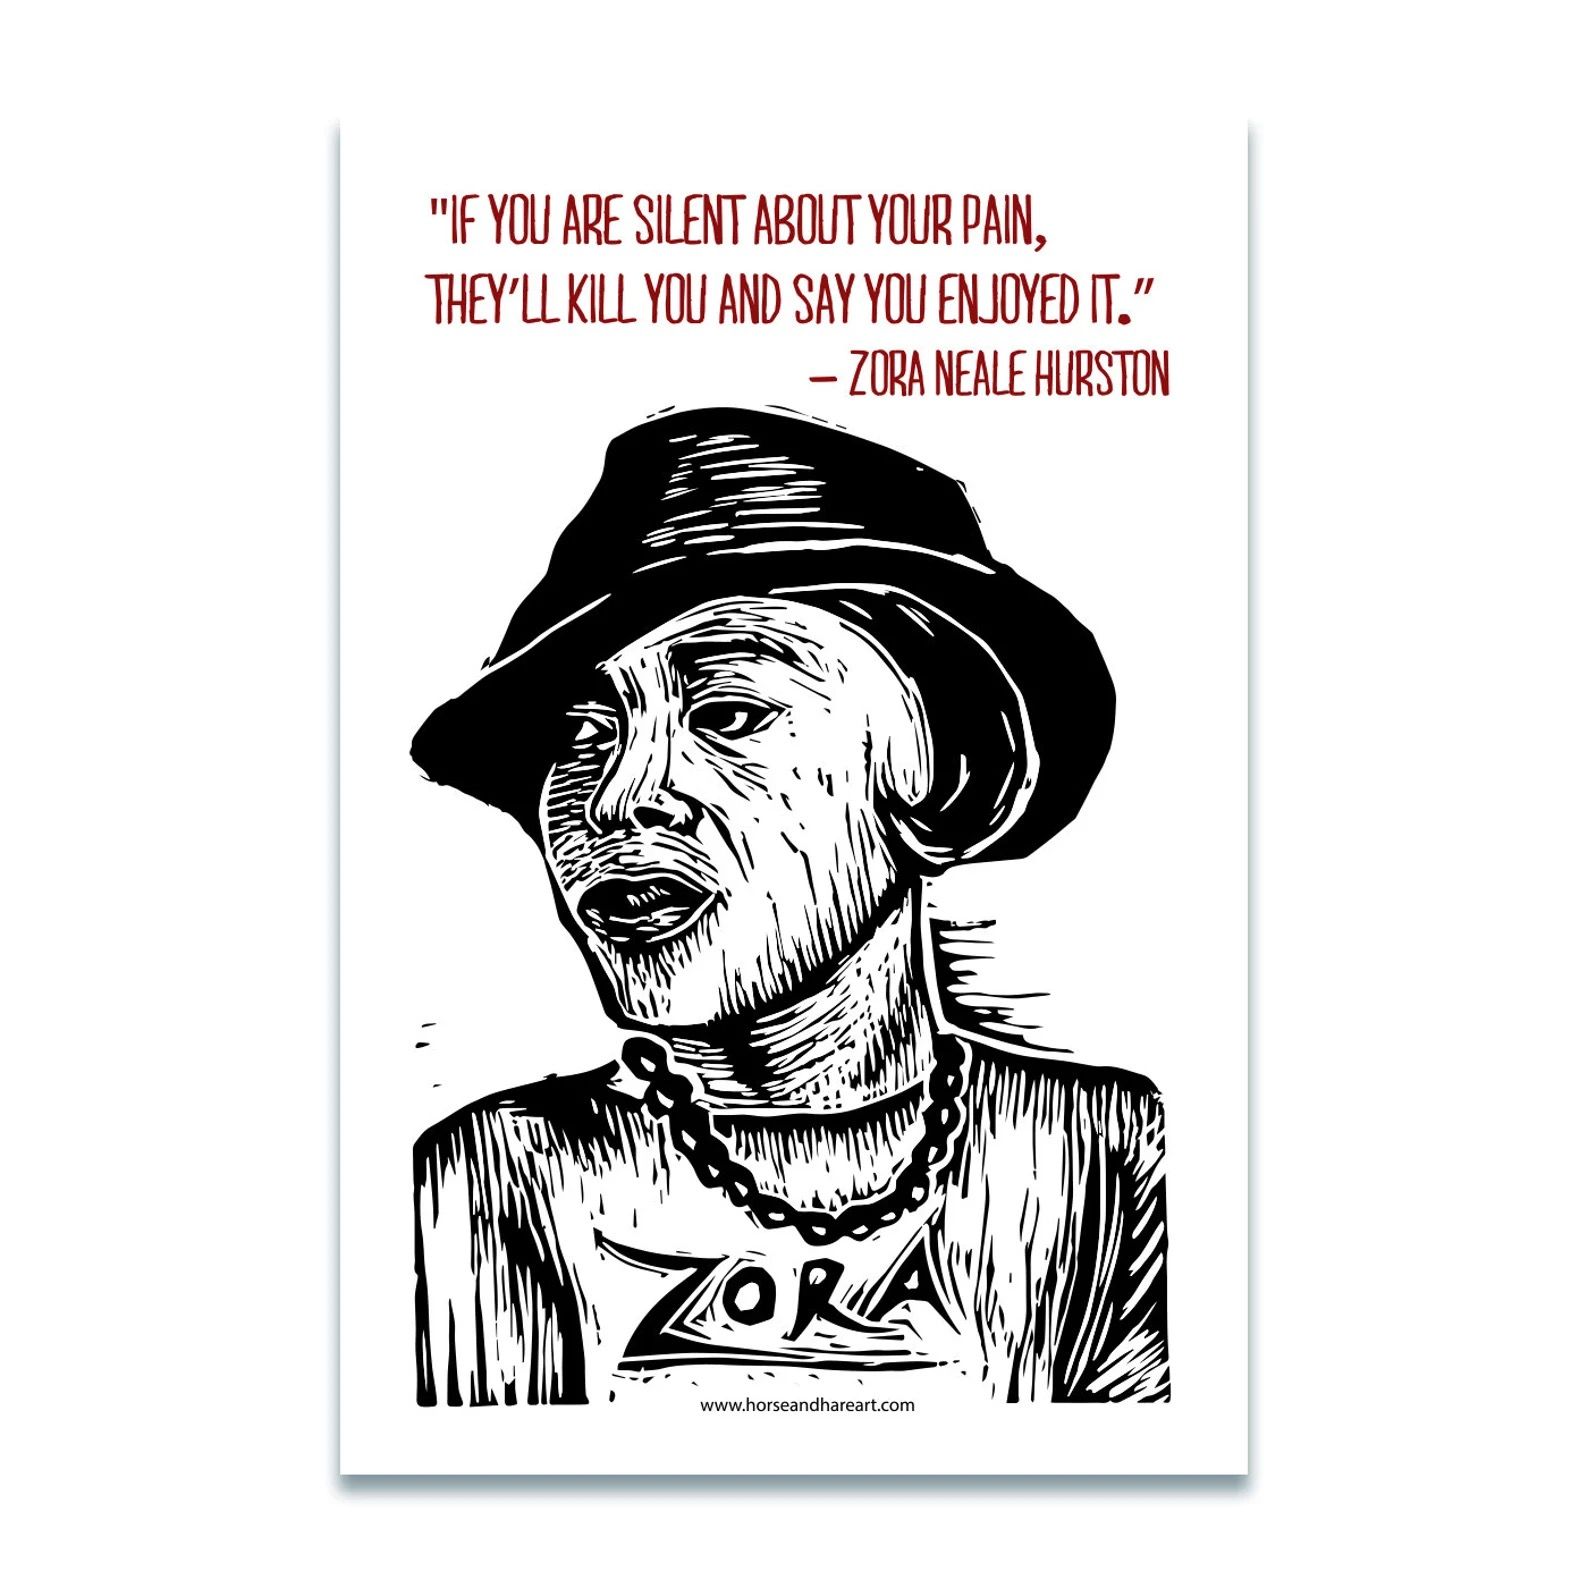 Postcard showing a black and white inked portrait of Zora Neale Hurston with a quote above printed in red letters.